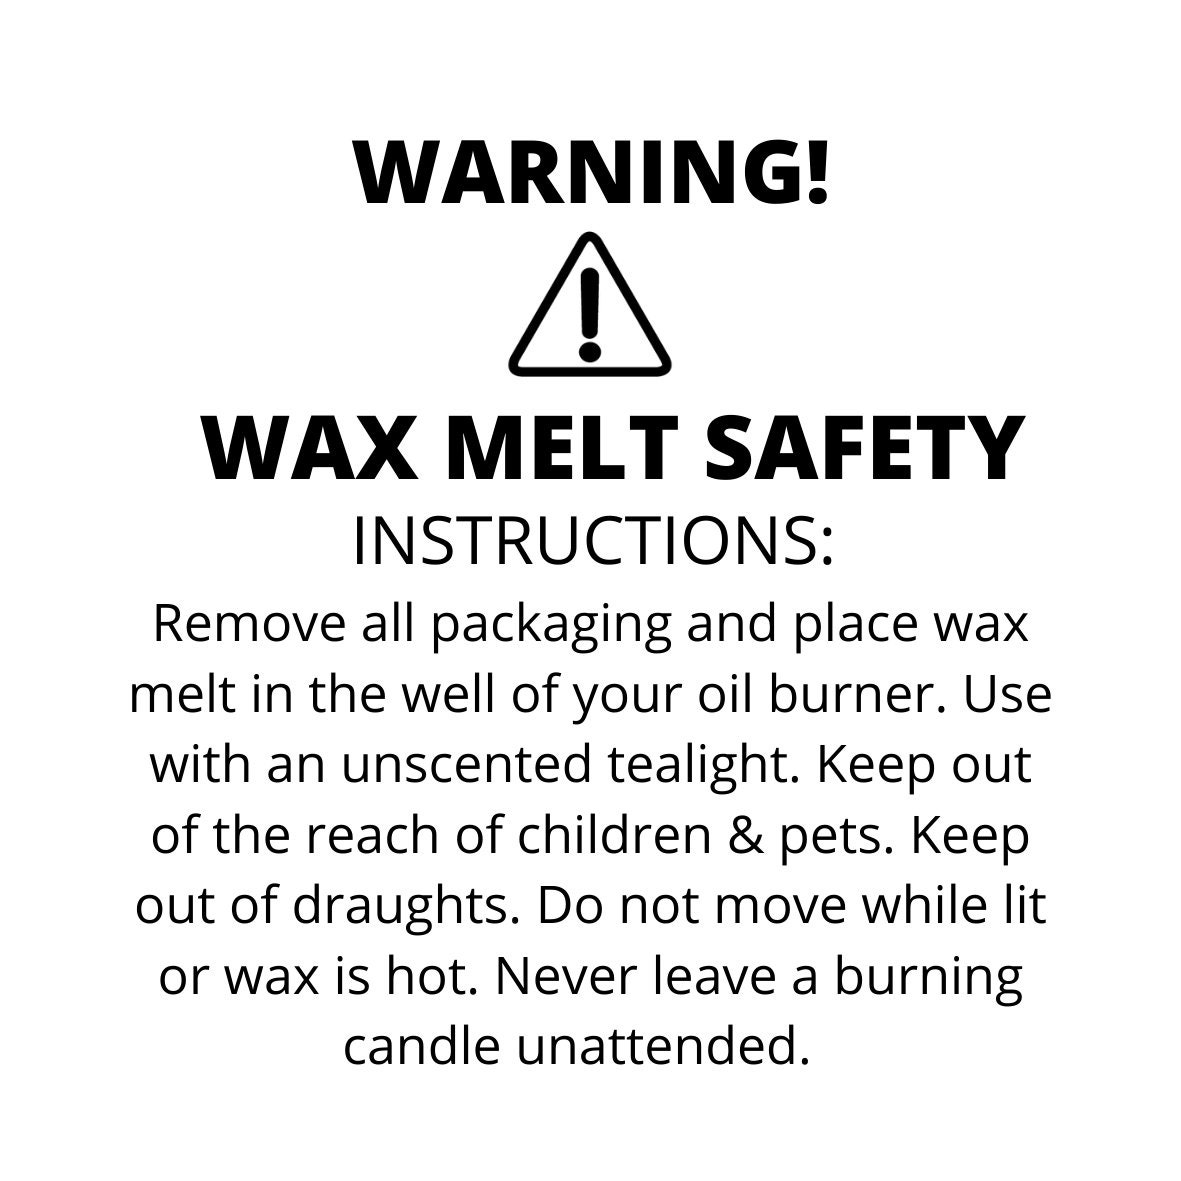 100 Round Warning Labels for Container Candles or Wax Melts 